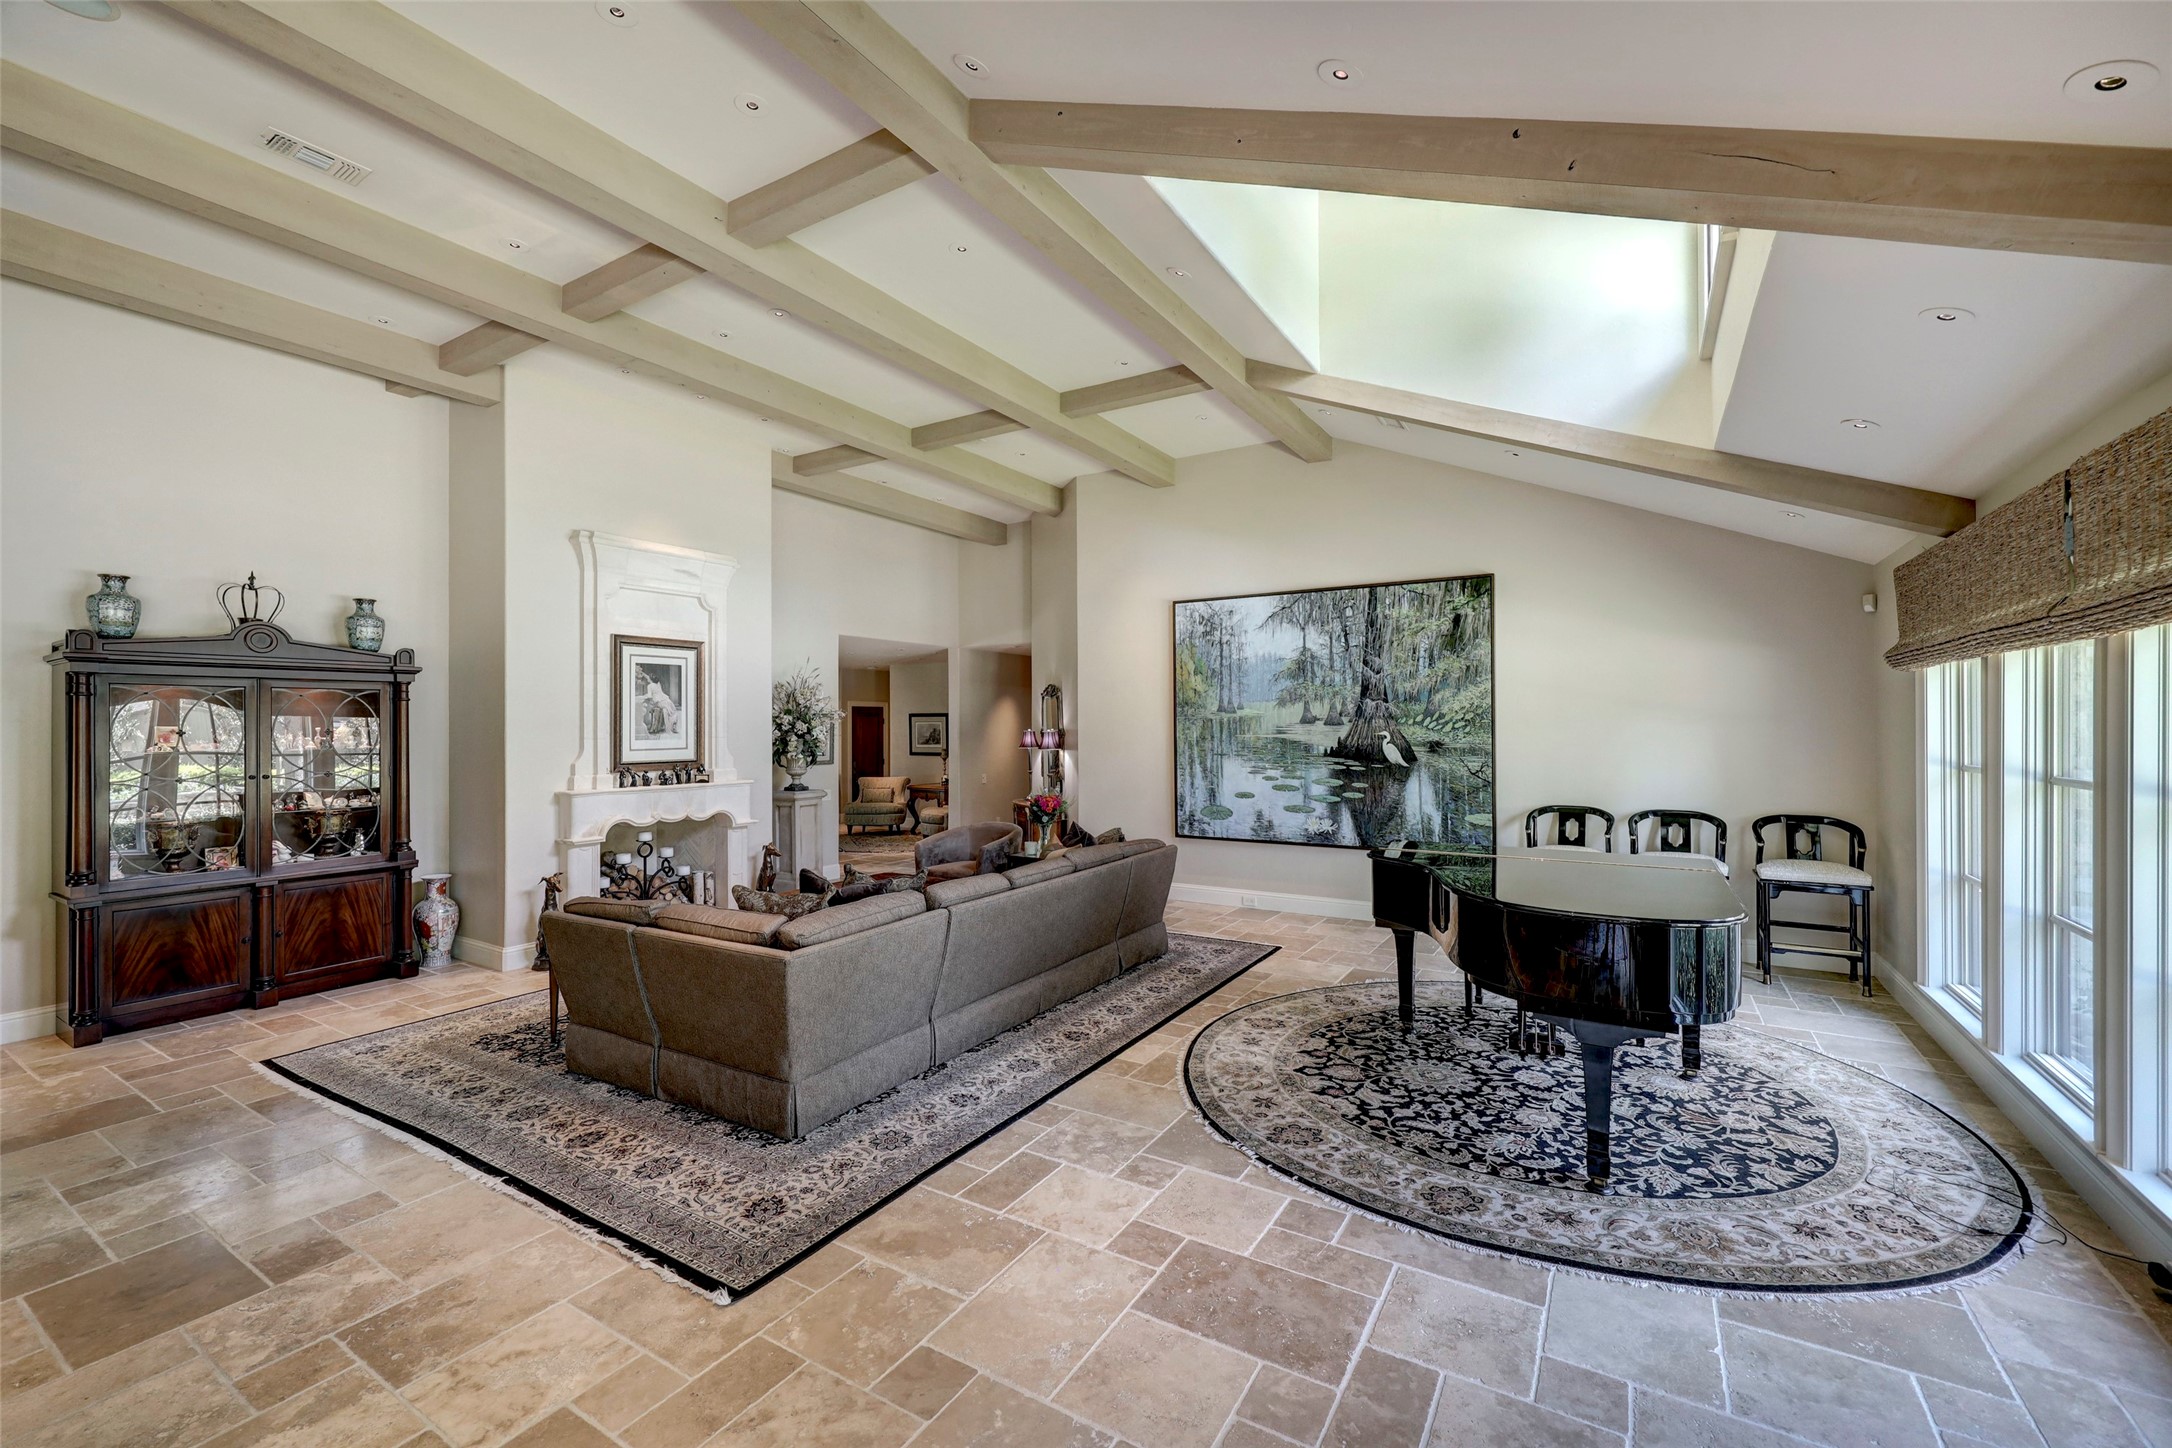 The great room features stone floor, high ceiling and abundant natural light.